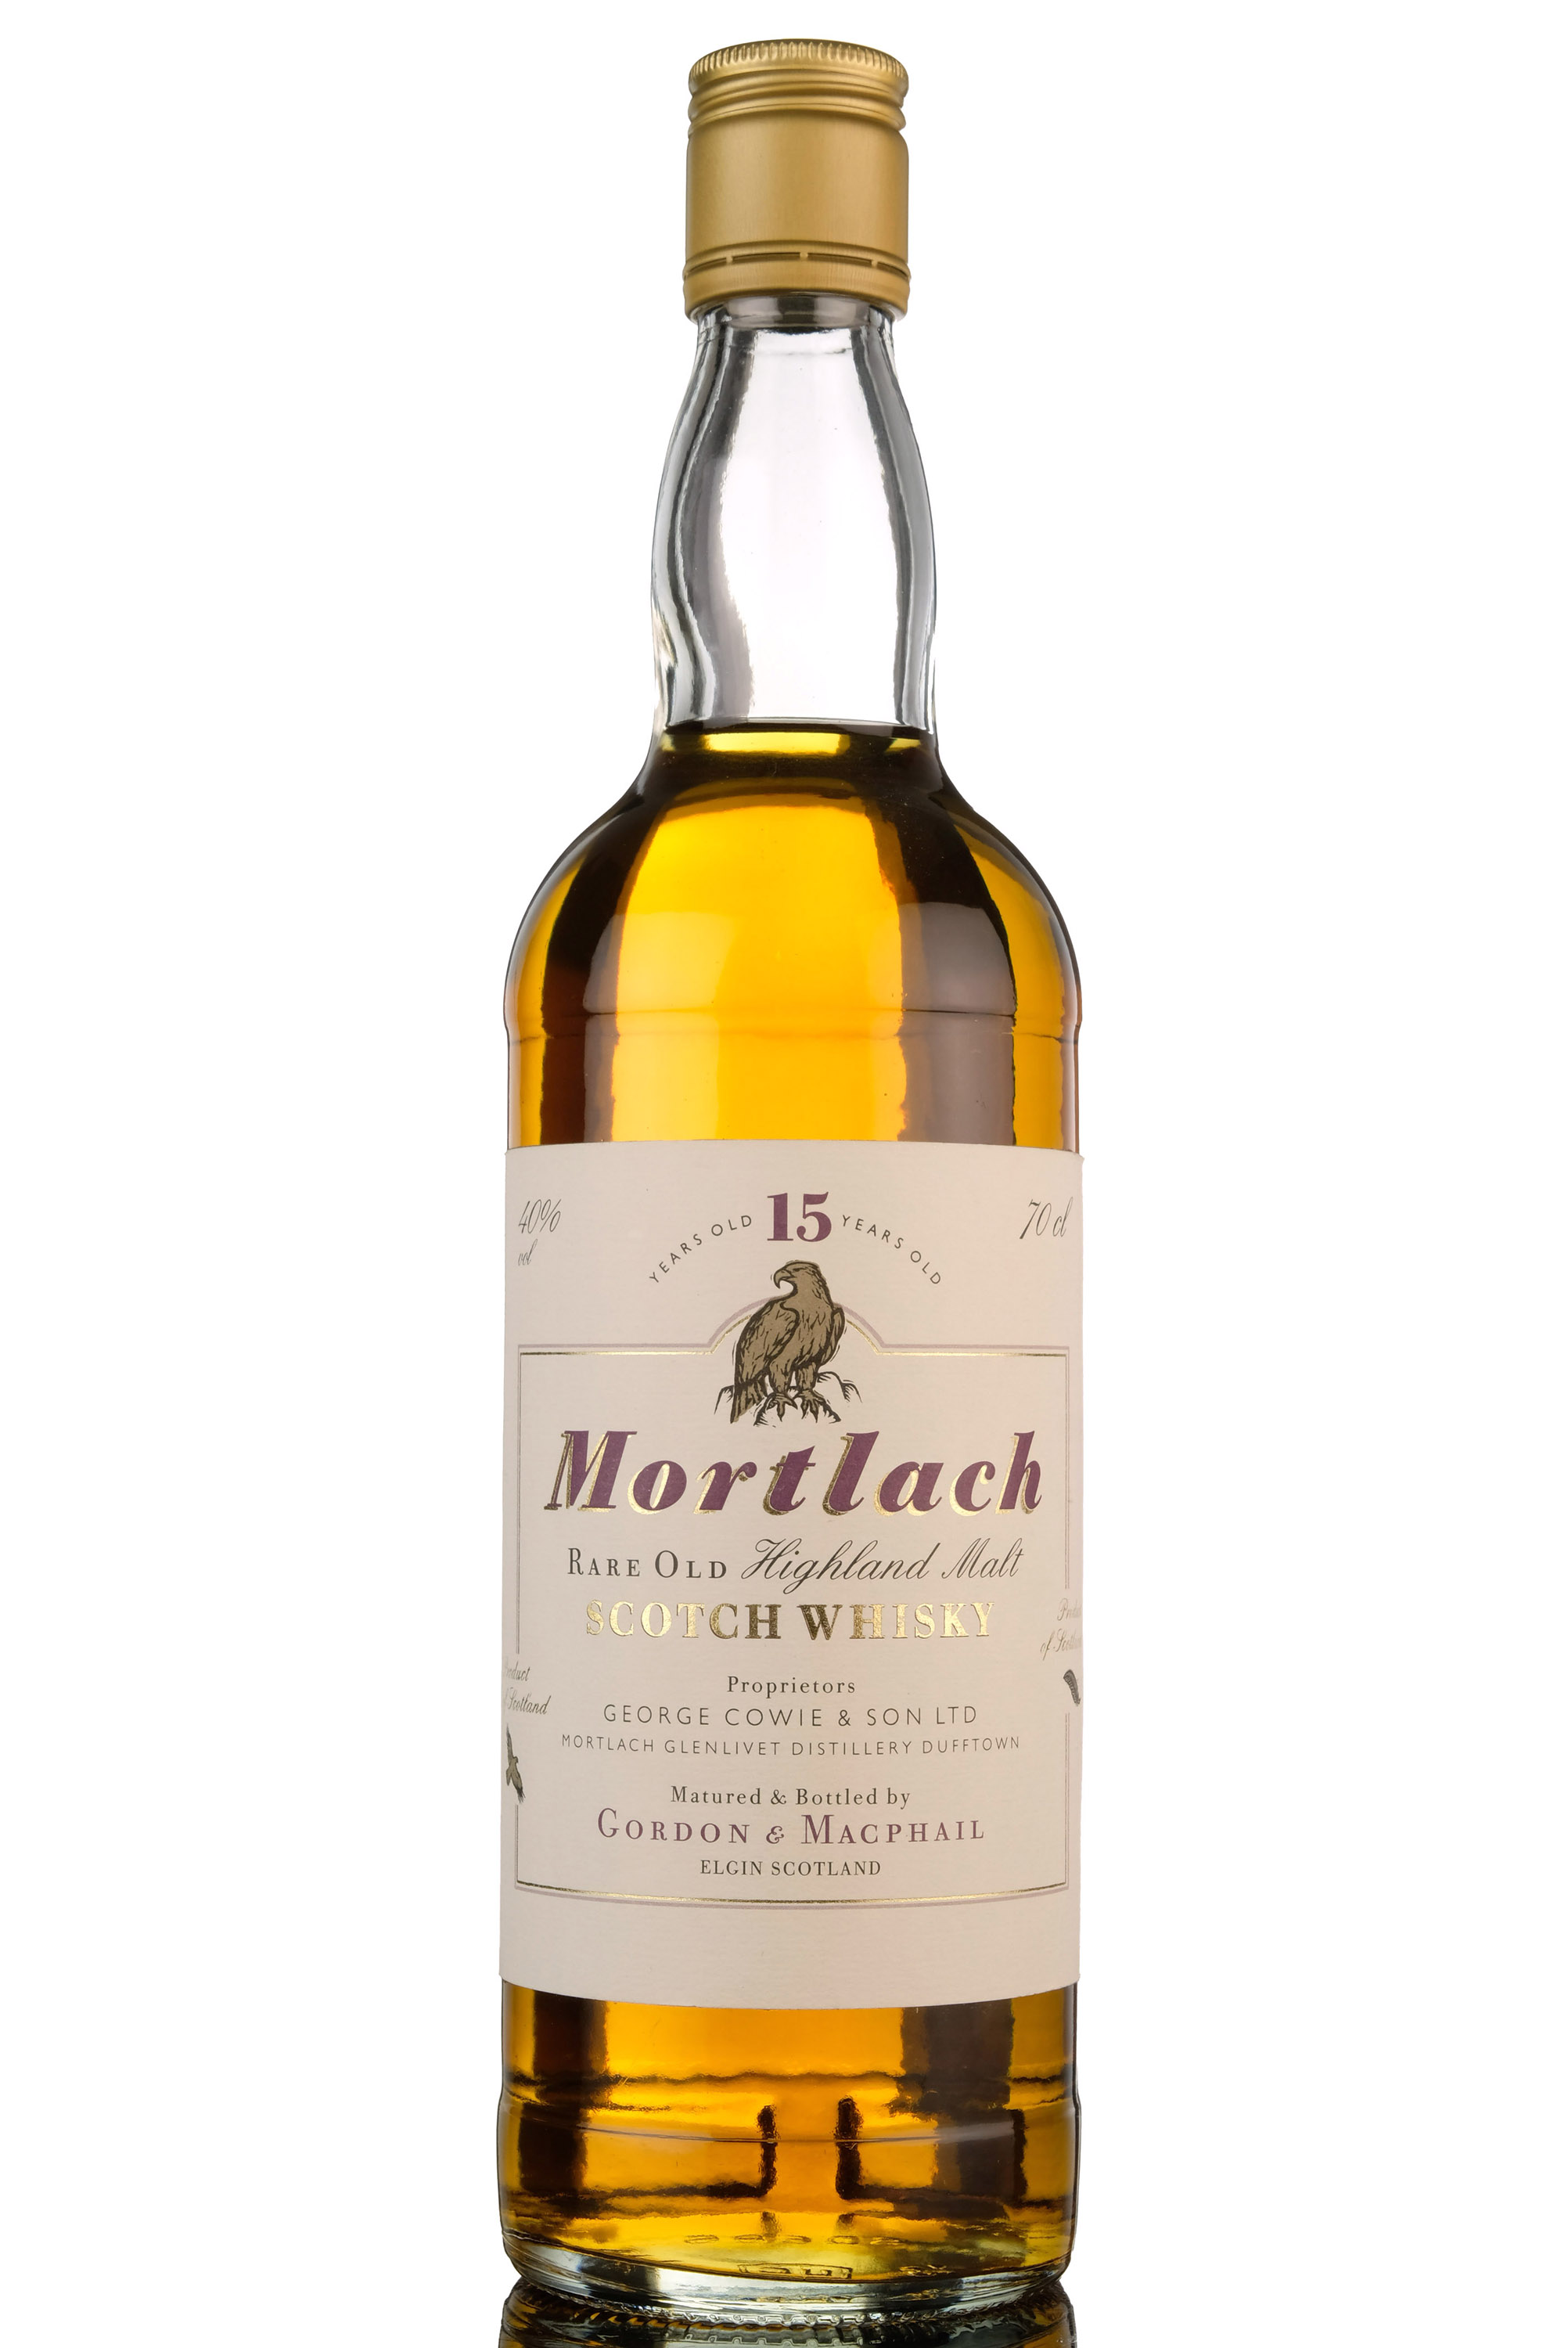 Mortlach 15 Year Old - Gordon & MacPhail - Early 2000s